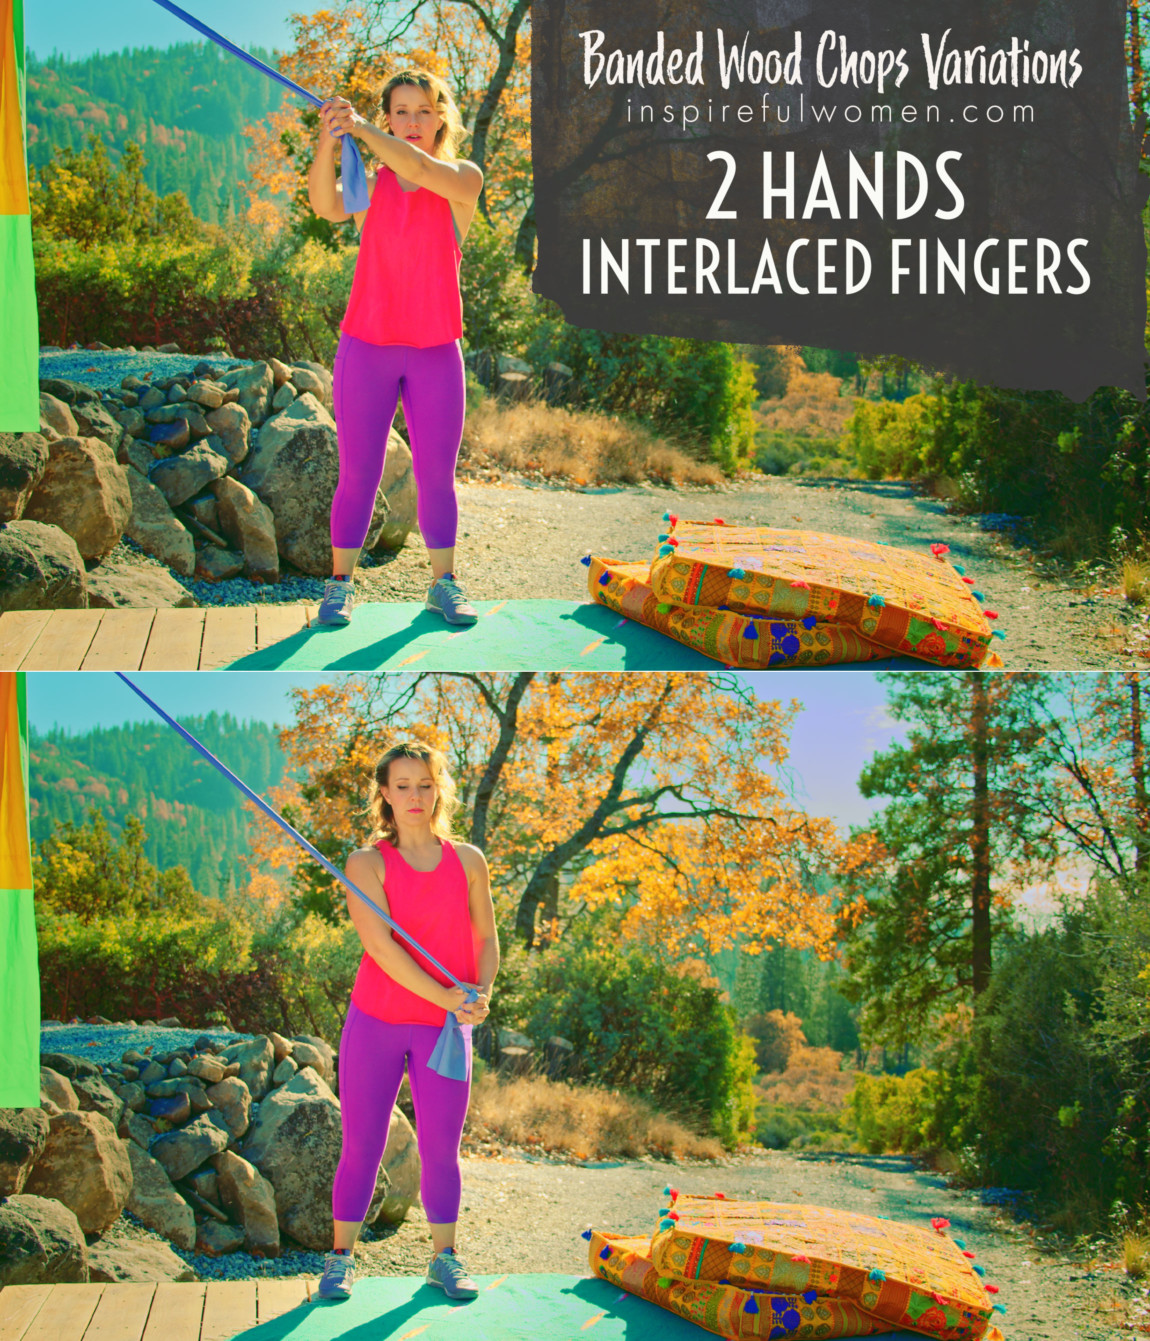 2-hands-interlaced-fingers-banded-wood-chops-core-exercise-variation